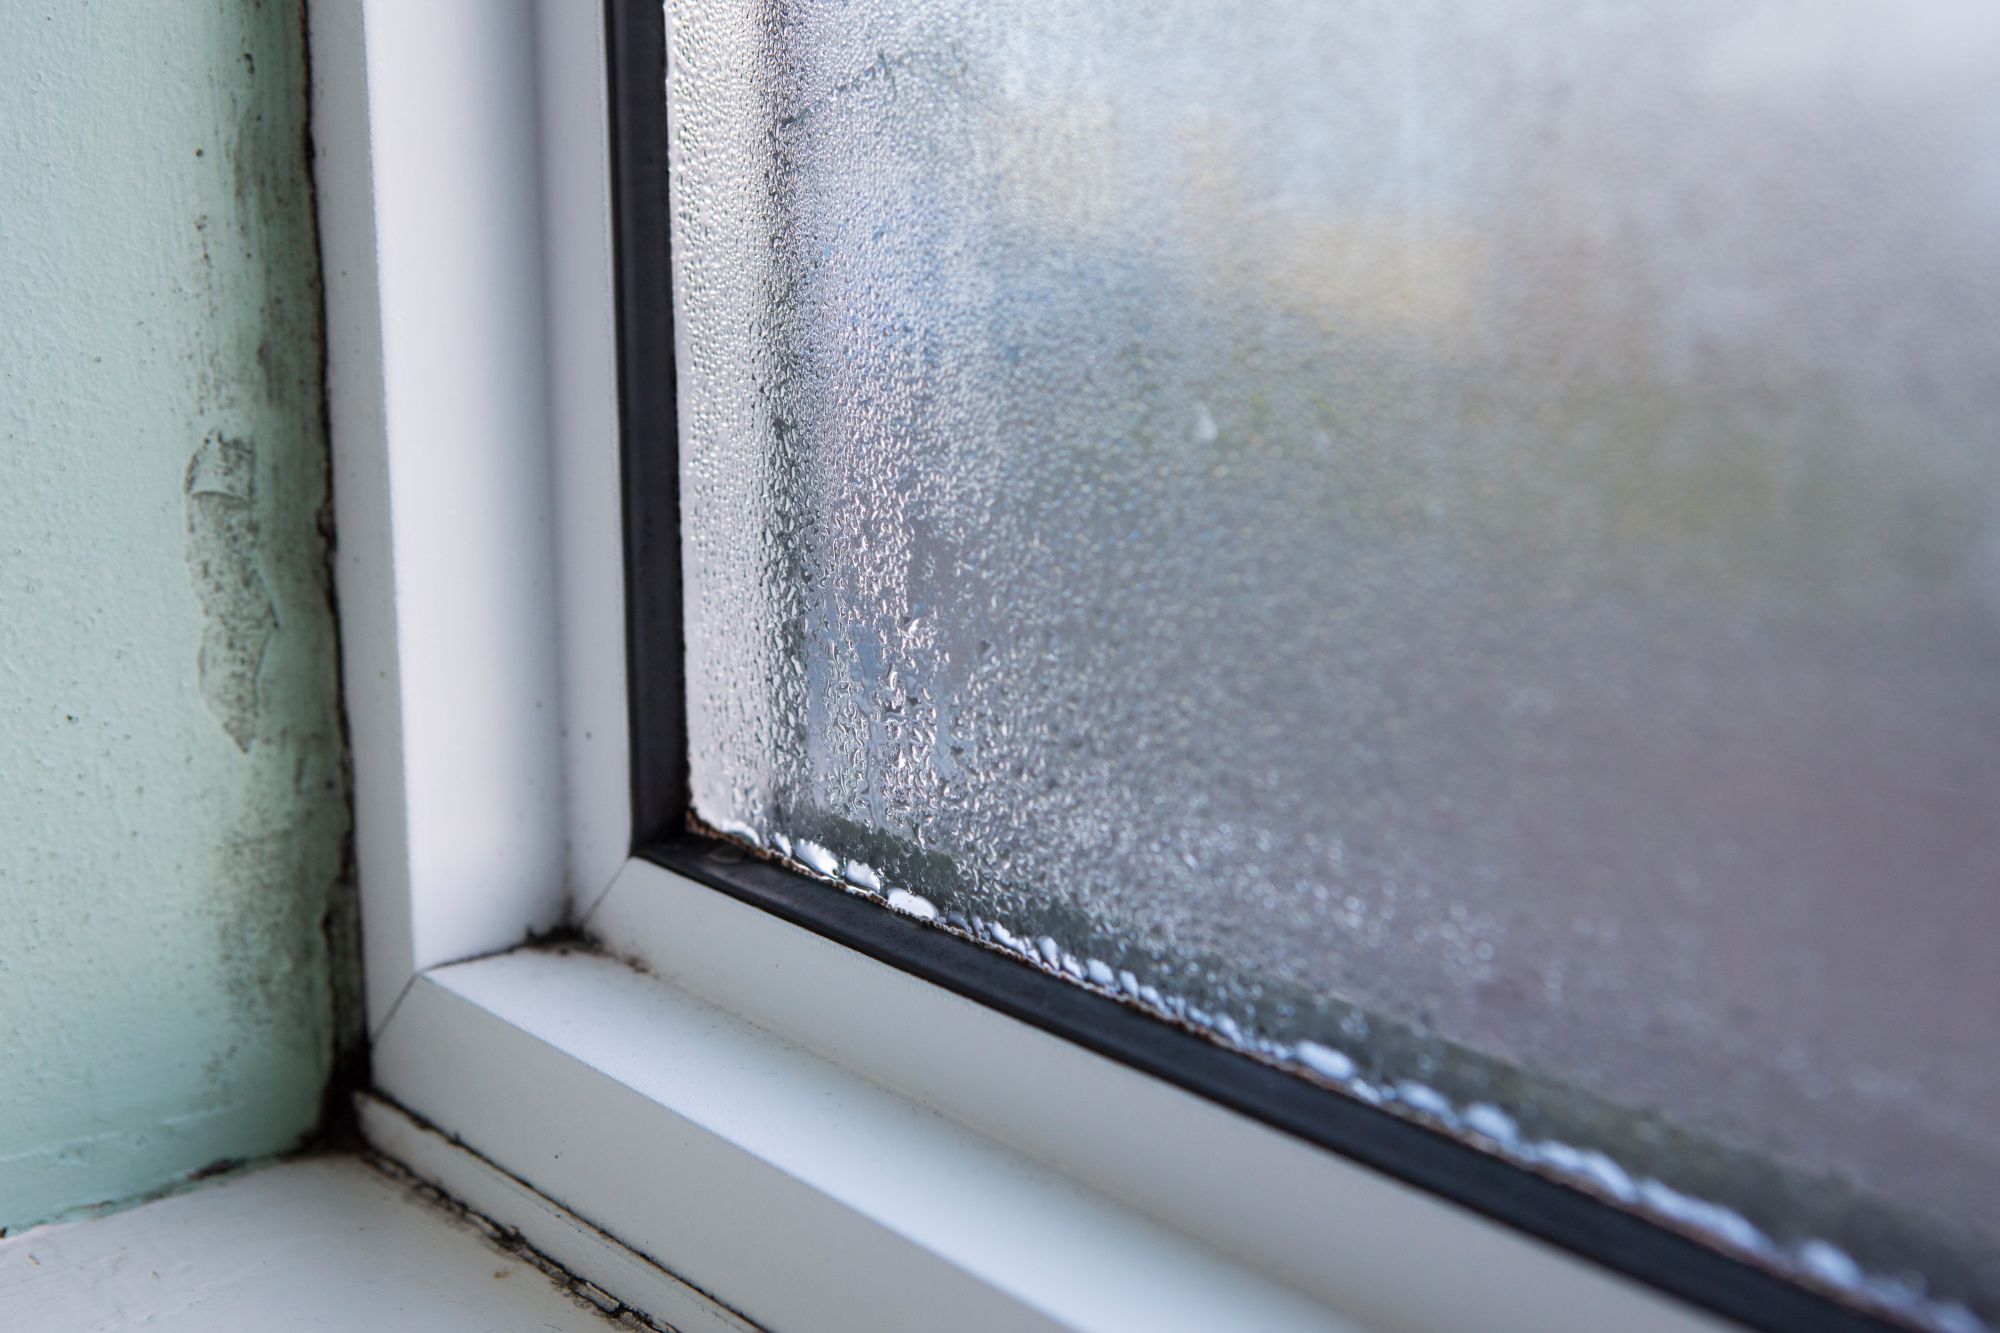 A damaged window lets moisture and mold through